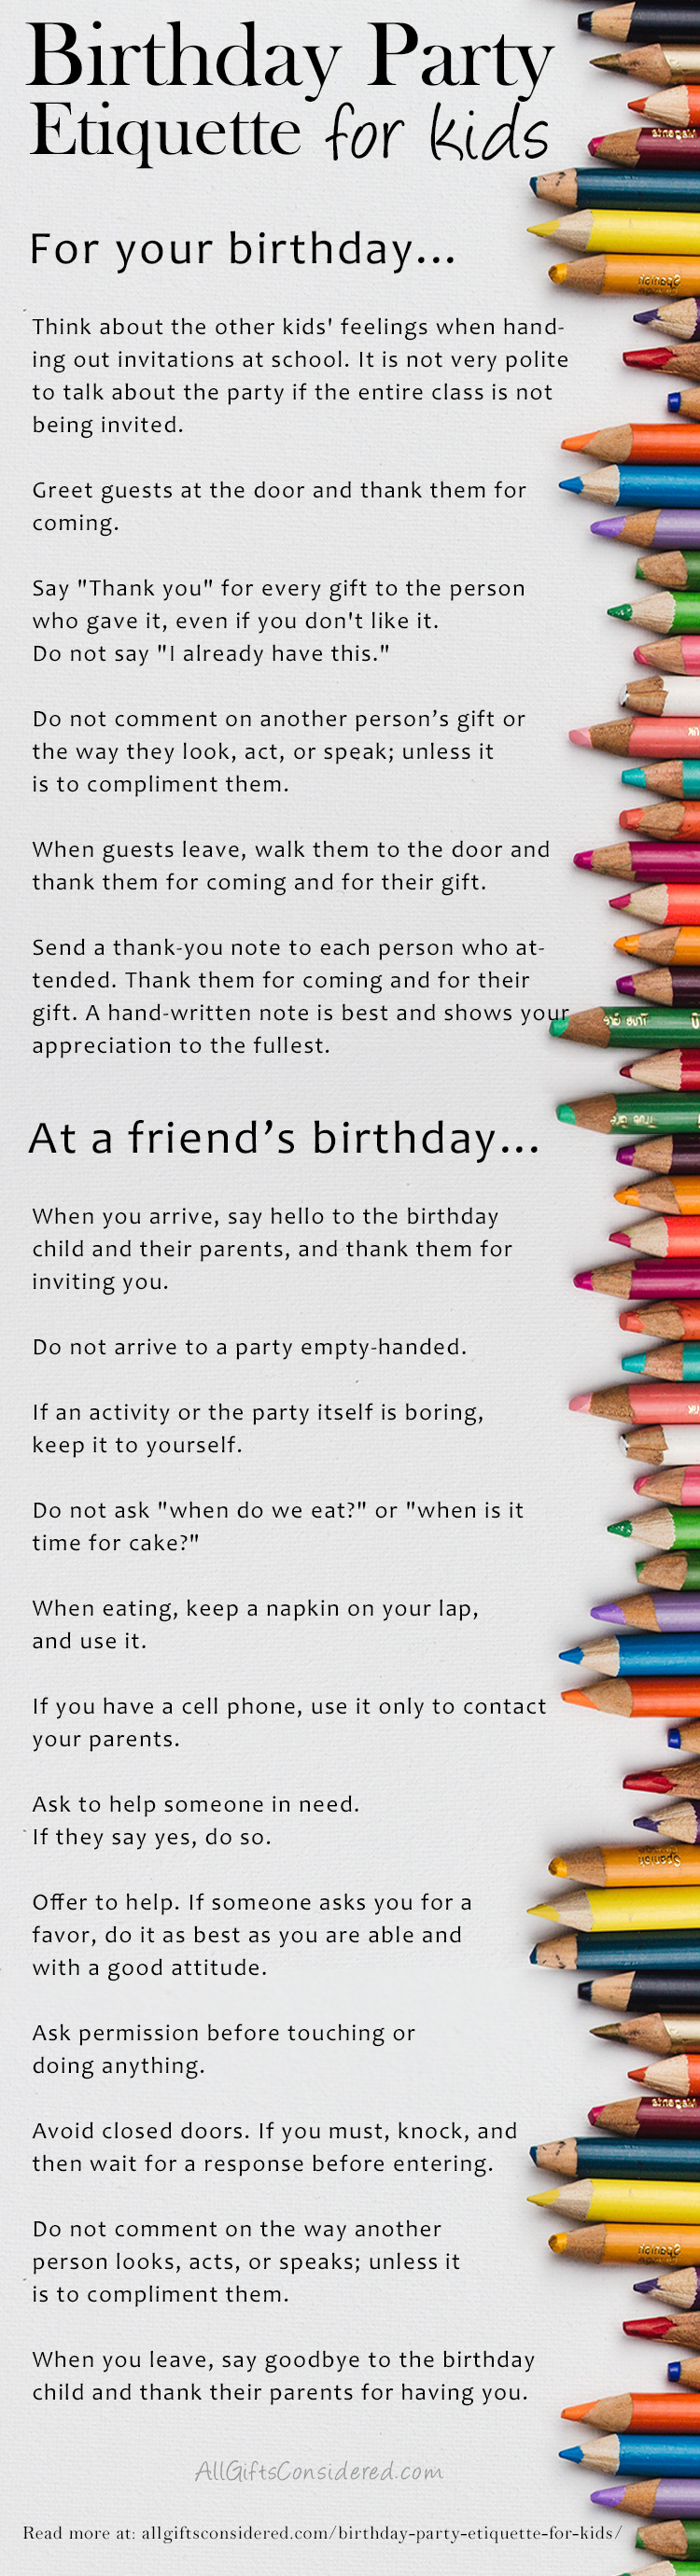 Guide to Birthday Party Etiquette